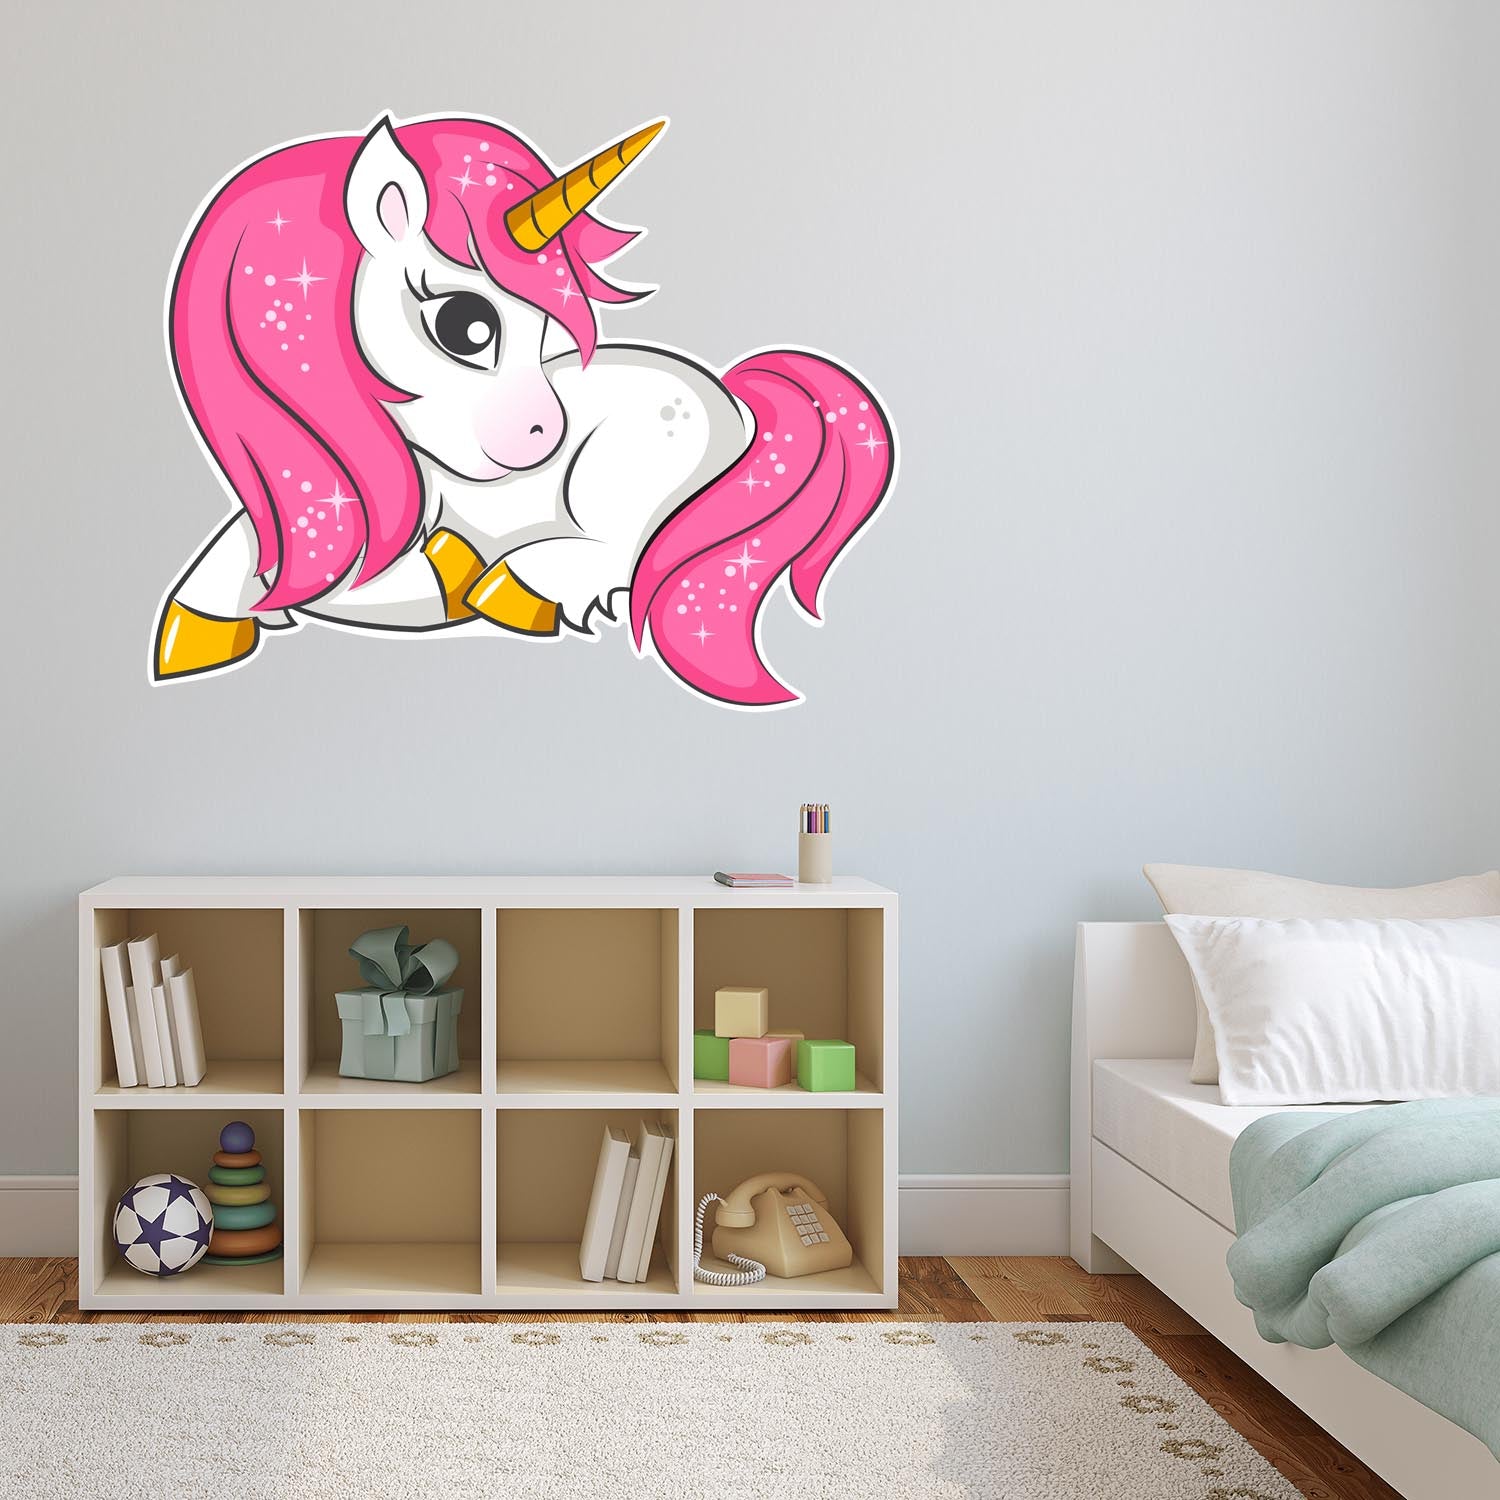 Pink Unicorn Decal, Wall Decal Sticker, Removable, Soft Fabric Decal